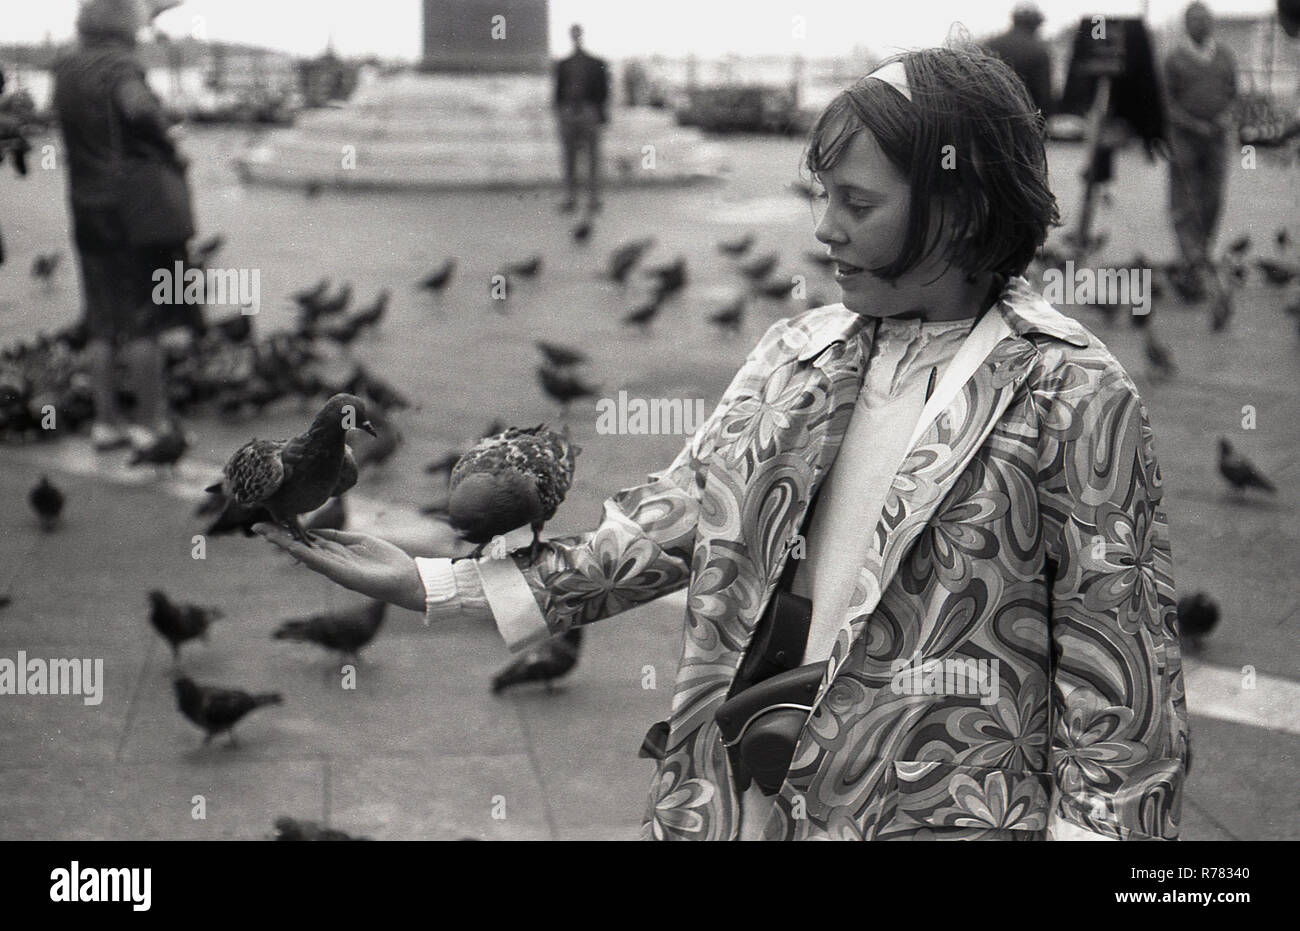 1970s, two pigeons on the arm of a young girl in a flower patterned coat standing in  the Piazza San Marco (St Mark's Sqaure) Venice, Italy. Pigeons have always been a popular tourist attraction in Venice and once rivaled cats as the traditional, if unofficial, mascots of the lagoon city. Stock Photo